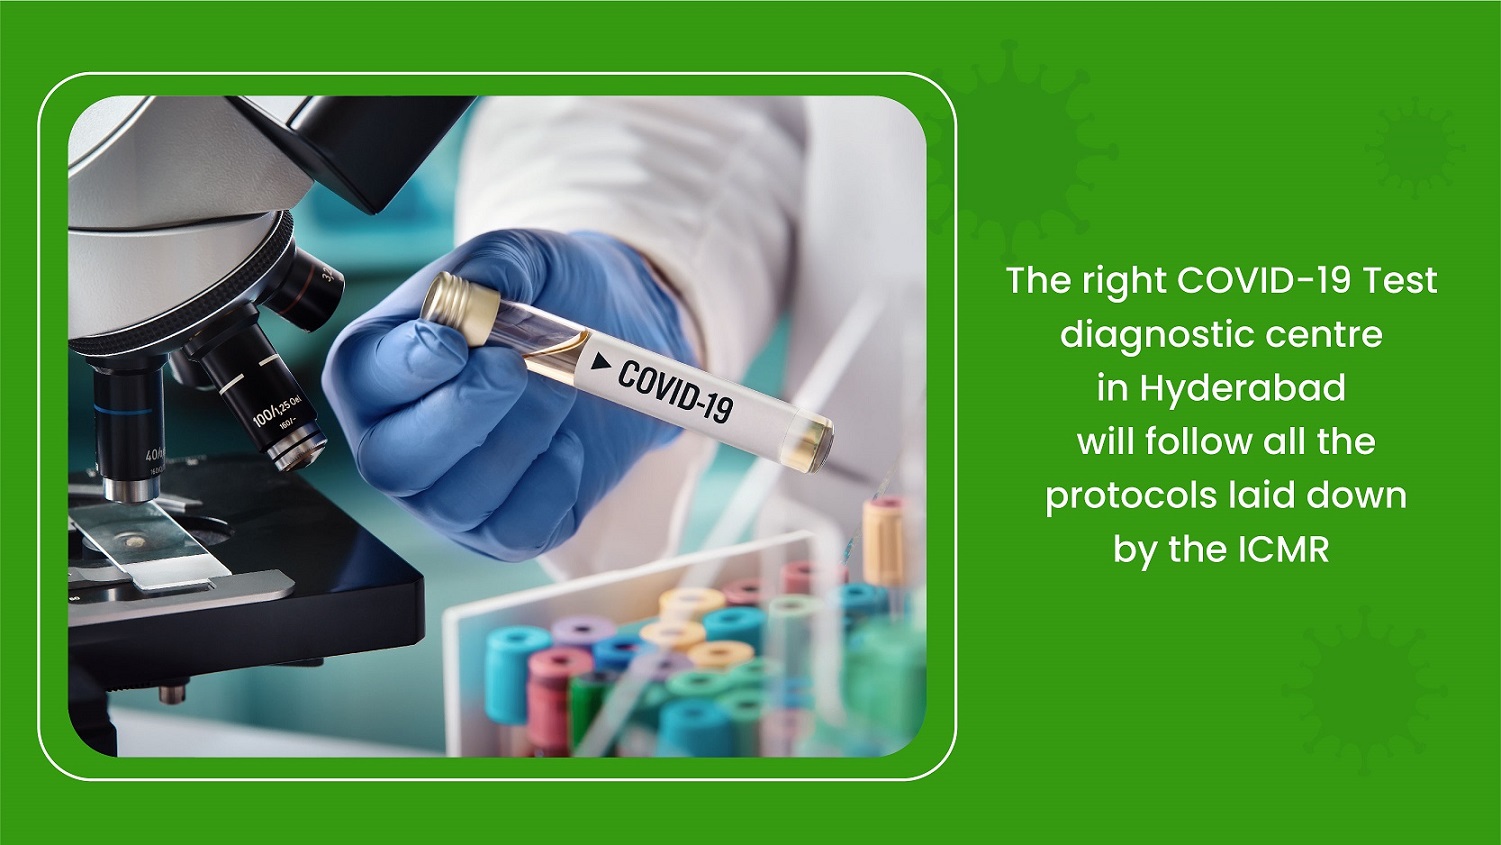 The right COVID-19 Test diagnostic centre in Hyderabad will follow all the protocols laid down by the ICMR 